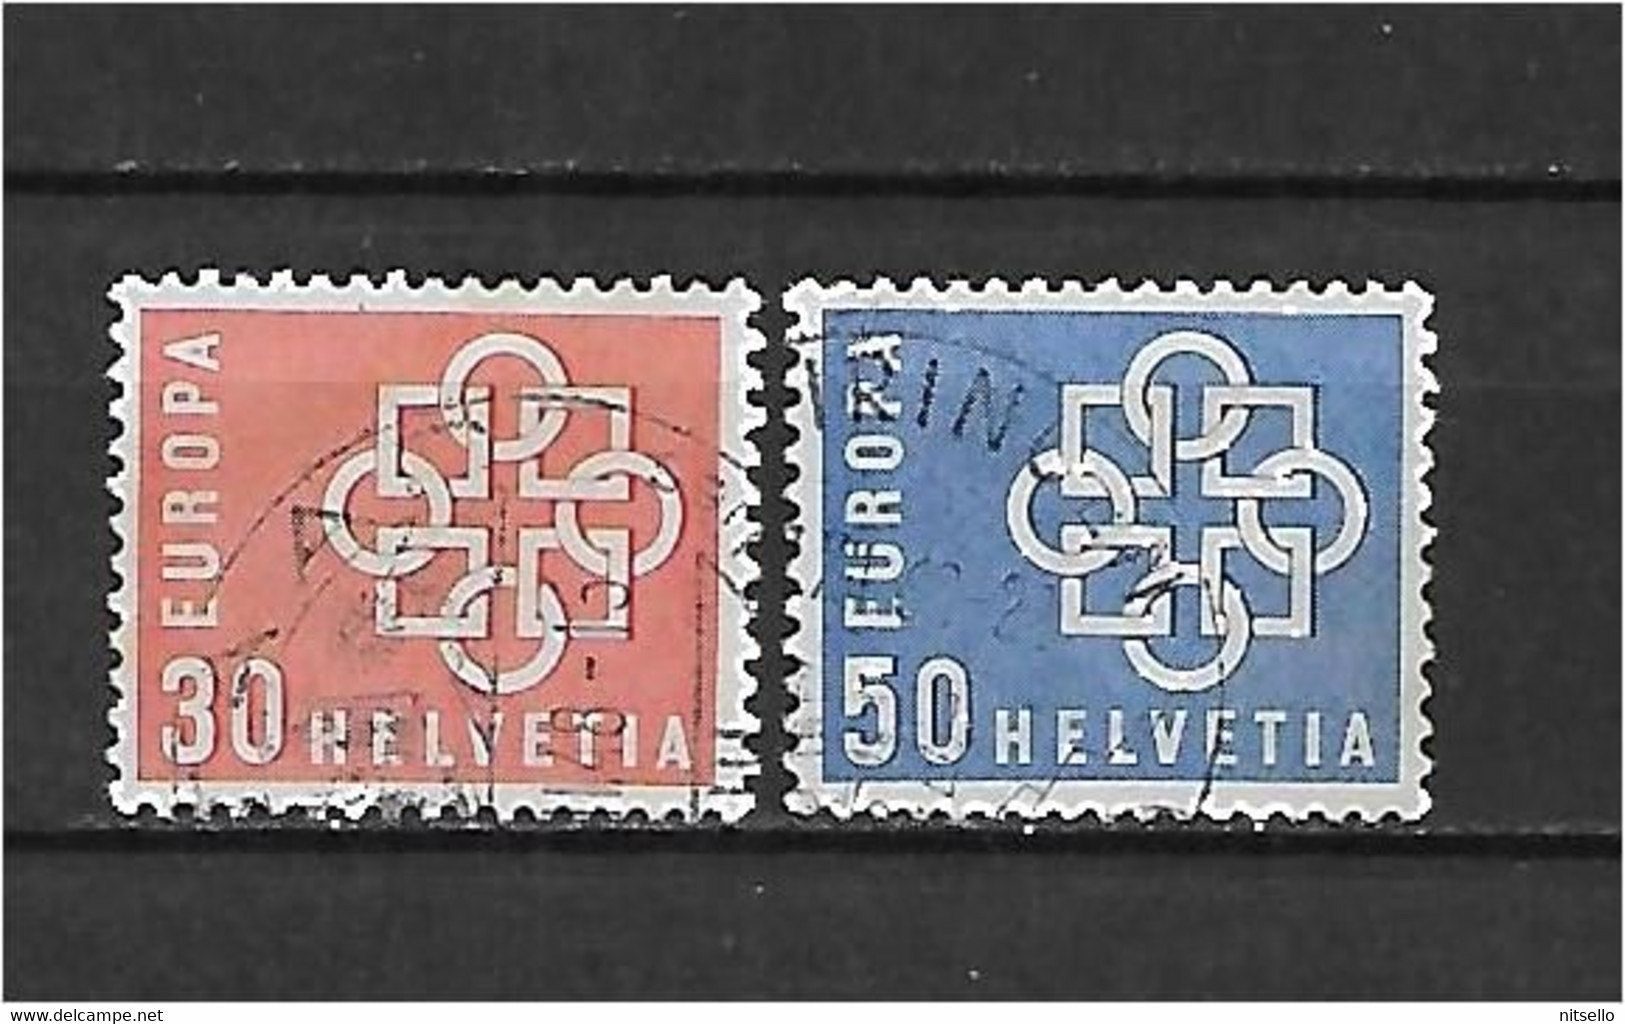 LOTE 1583  ///  SUIZA   YVERT Nº: 630/631     ¡¡¡ OFERTA - LIQUIDATION - JE LIQUIDE !!! - Used Stamps